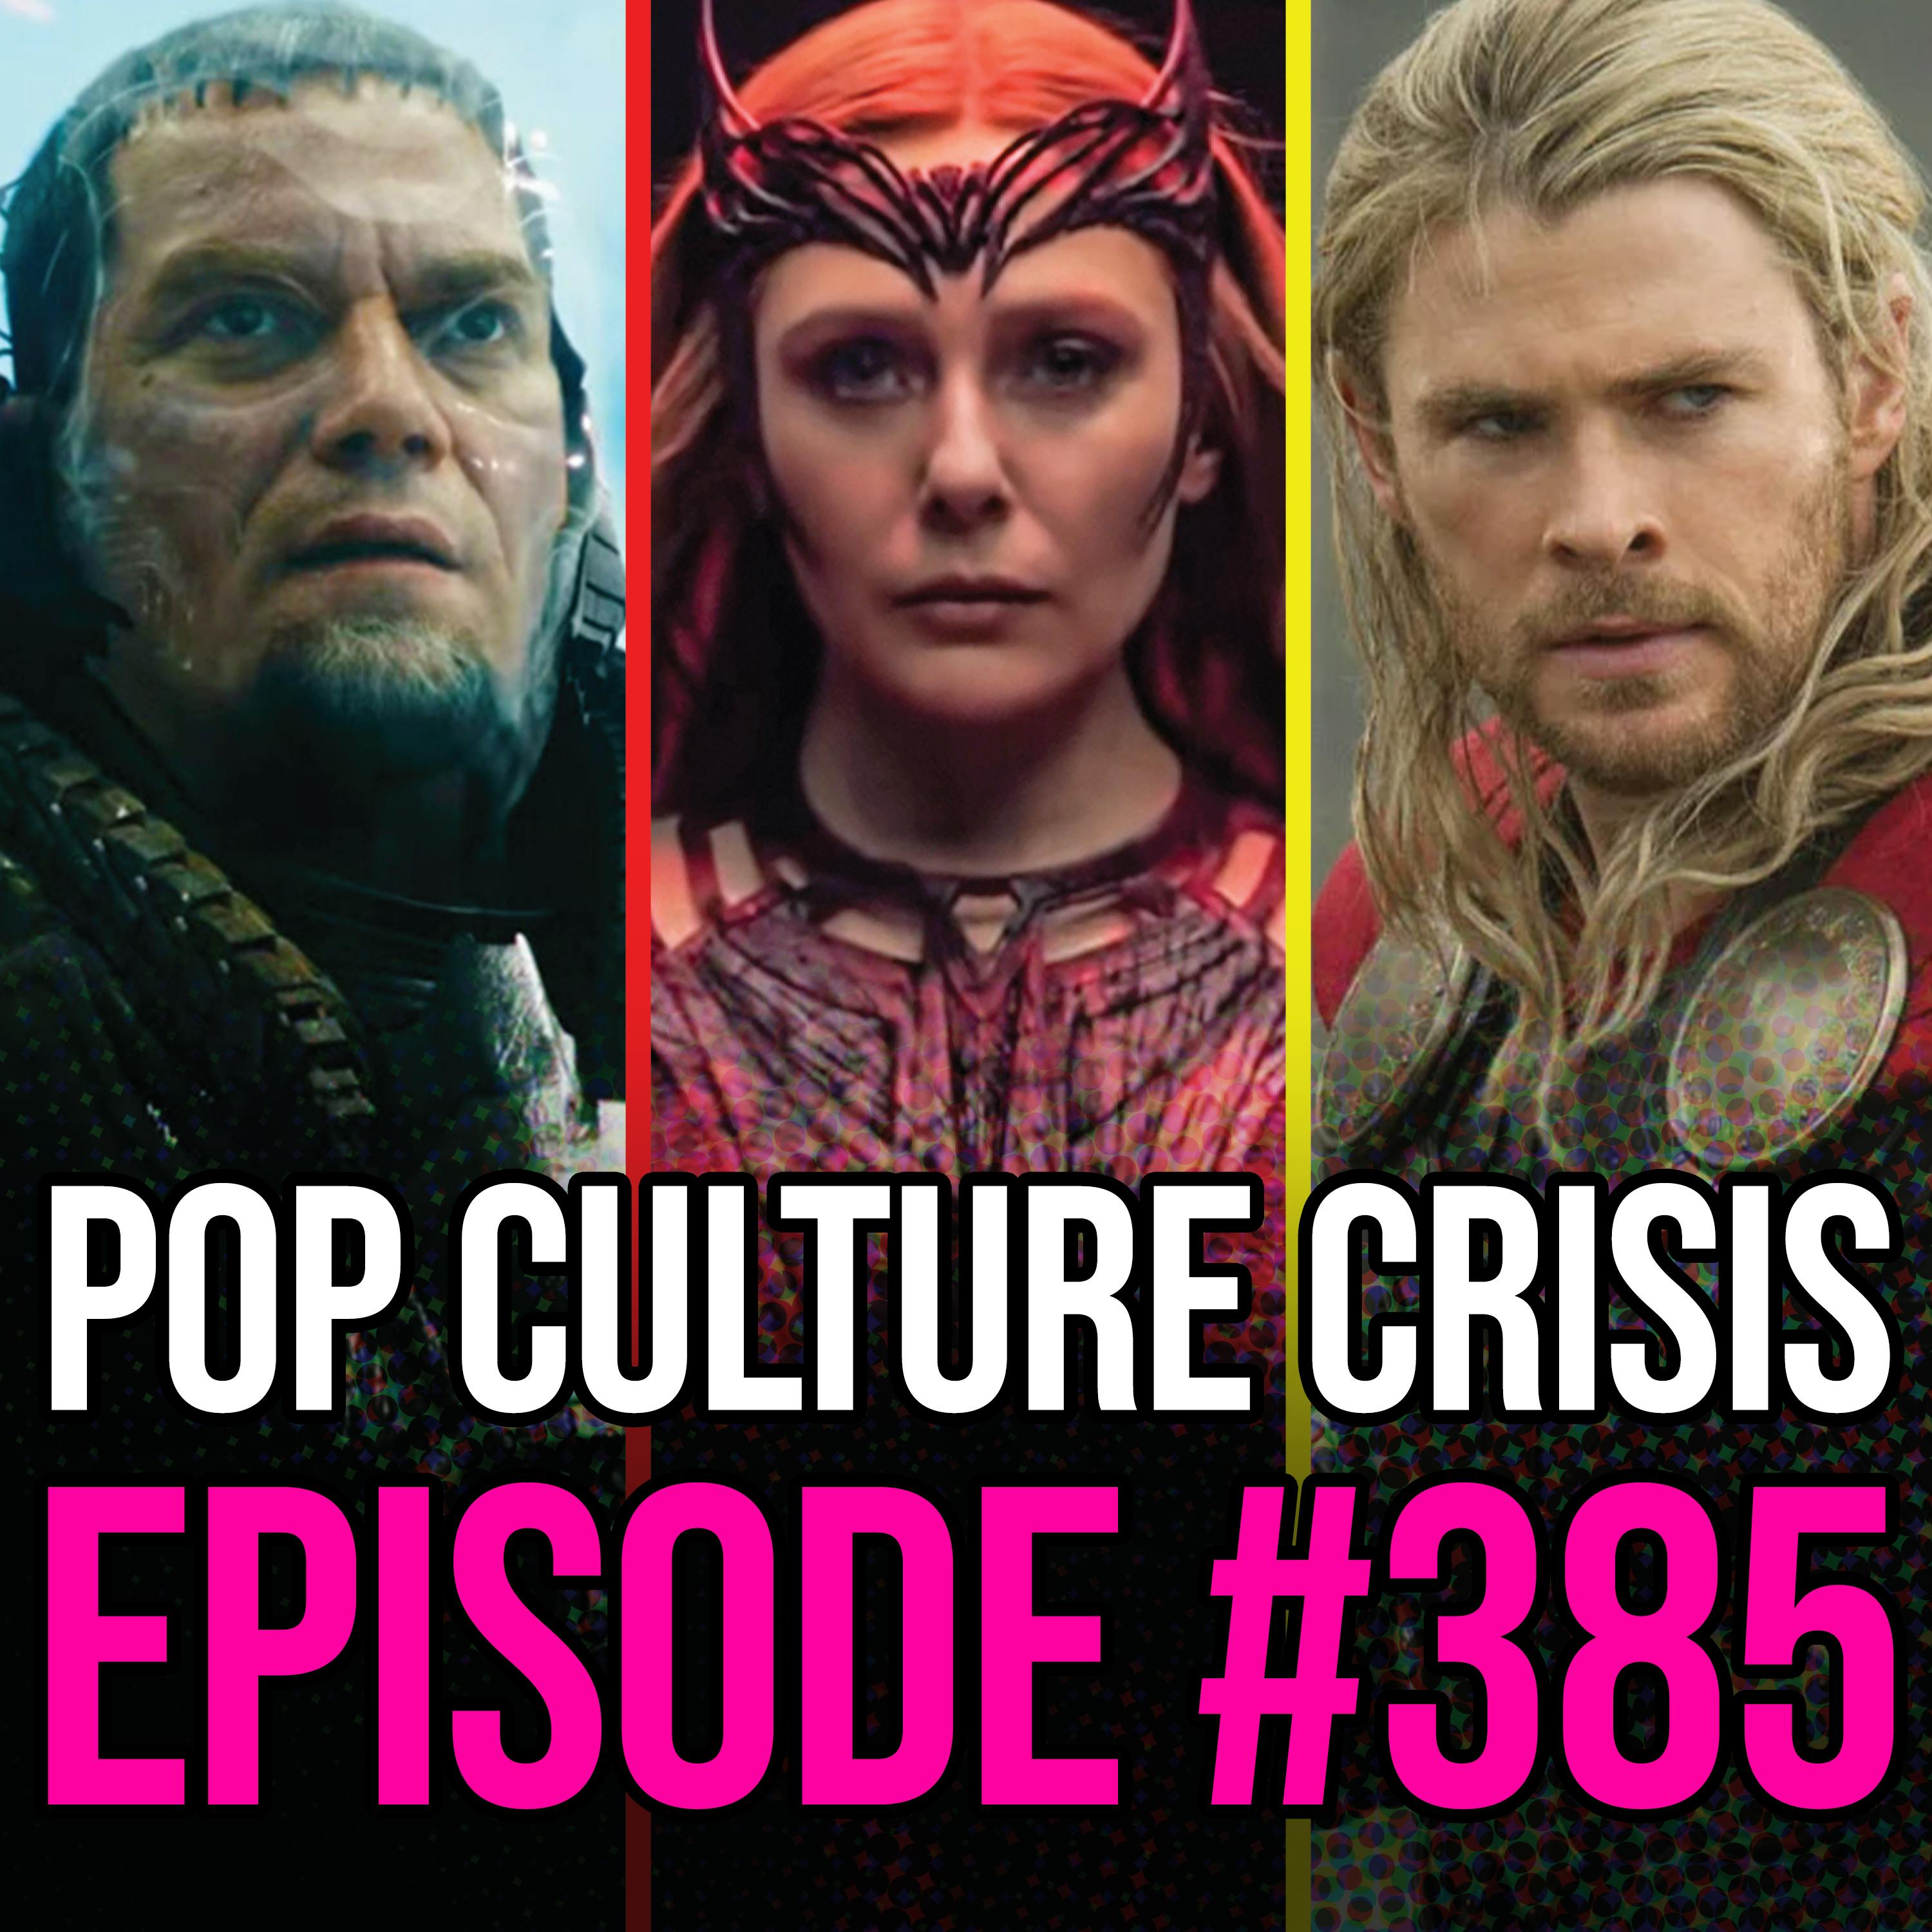 EPISODE 385: Marvel & DC Stars Hate Being Superheroes, Marvel's Tenoch Huerta Accused of Very Bad Things, Streamer Stands by Nickmercs in C.O.D. 'Anti-Pride' Controversy